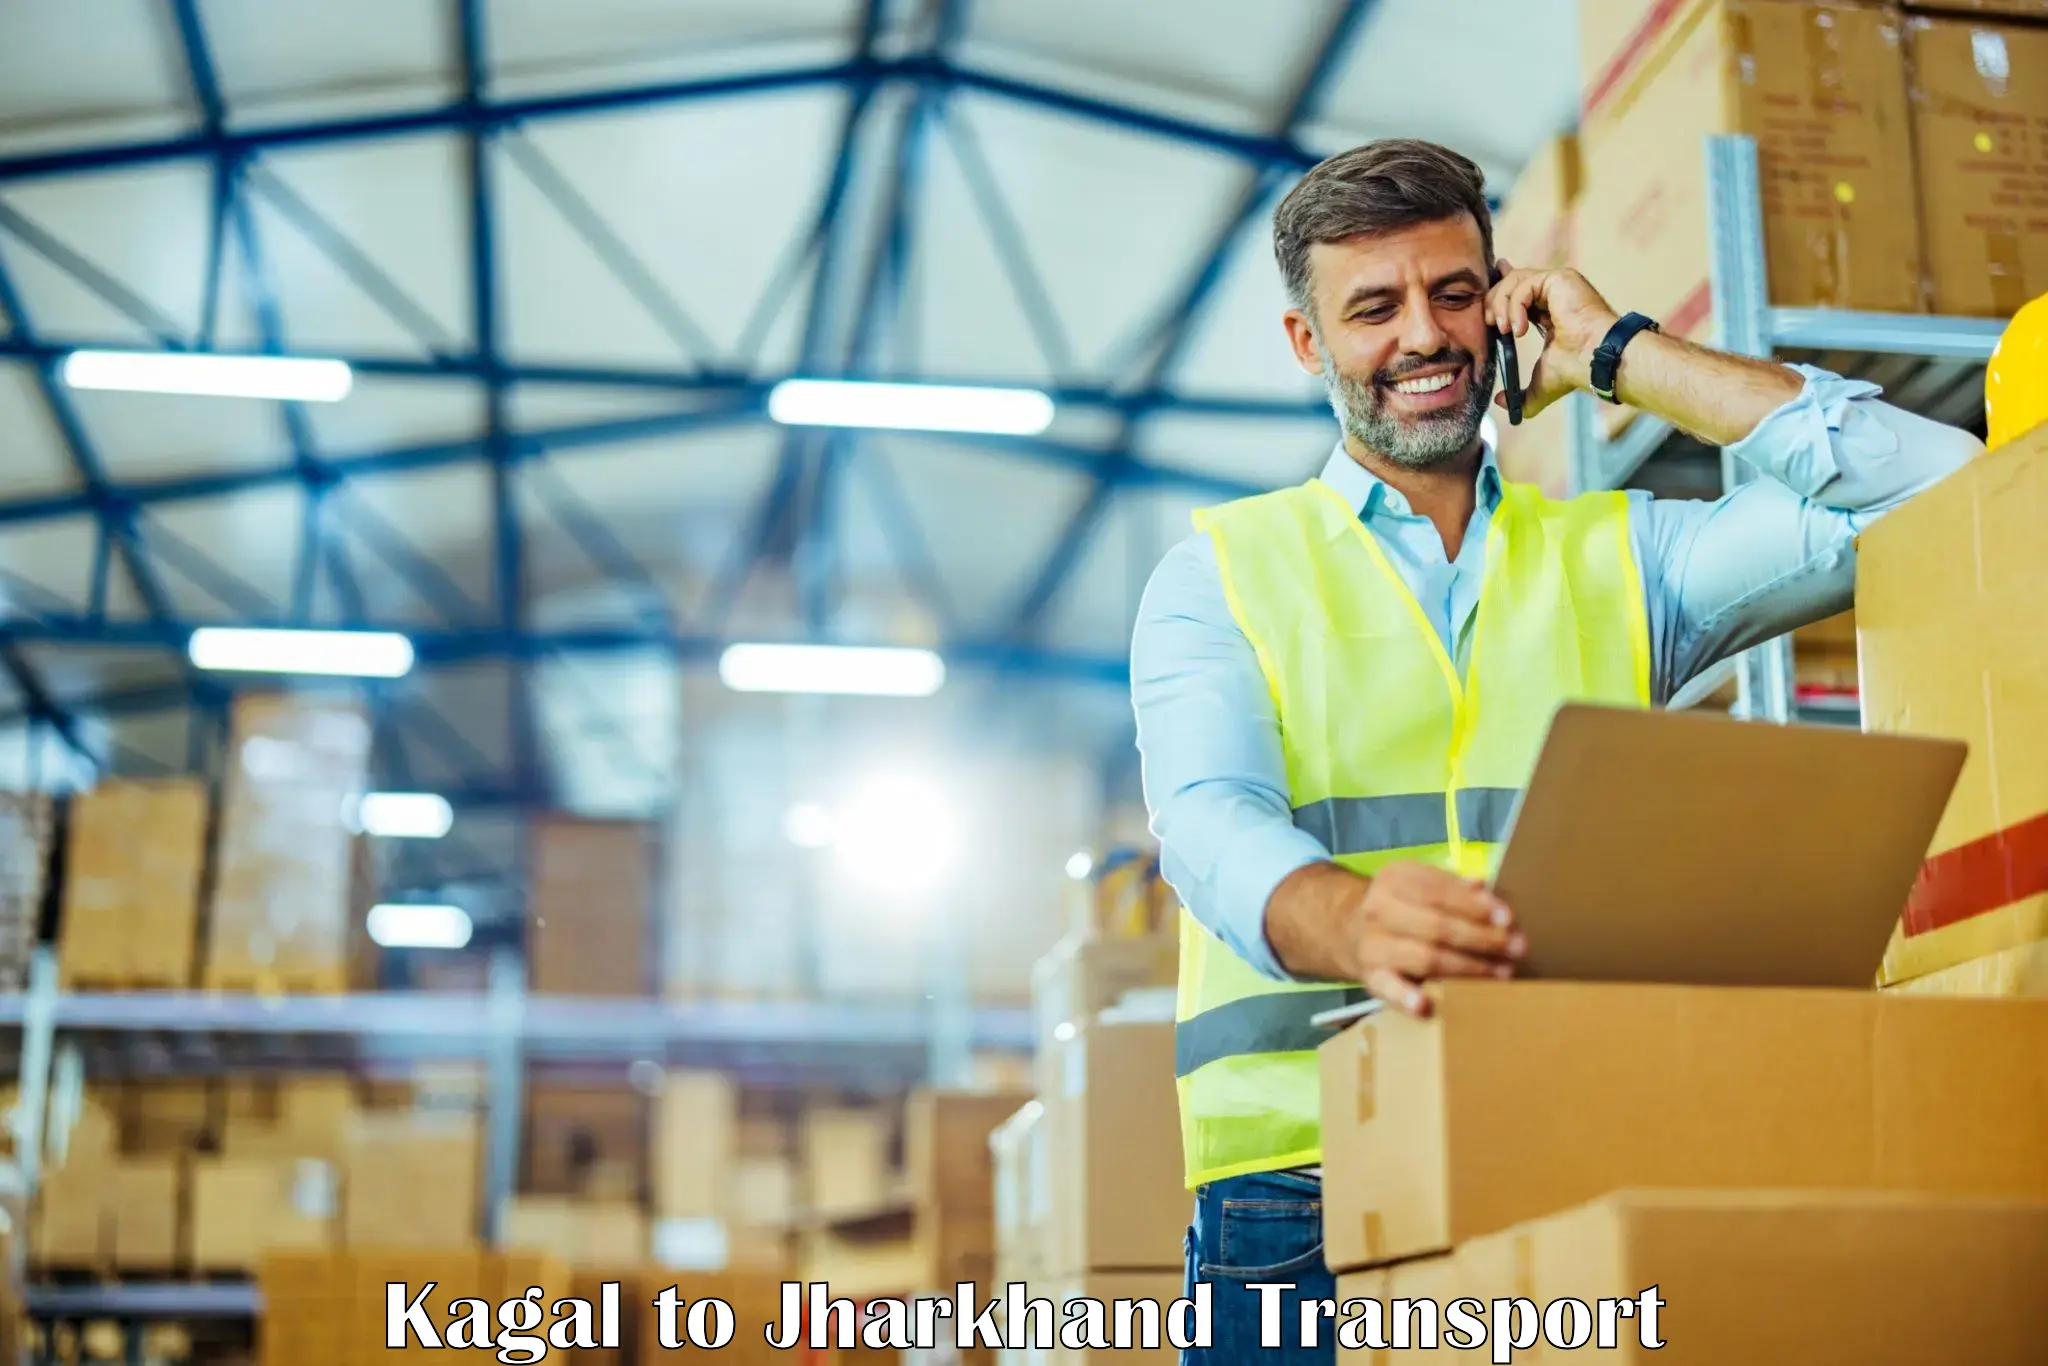 Nationwide transport services Kagal to Jharkhand